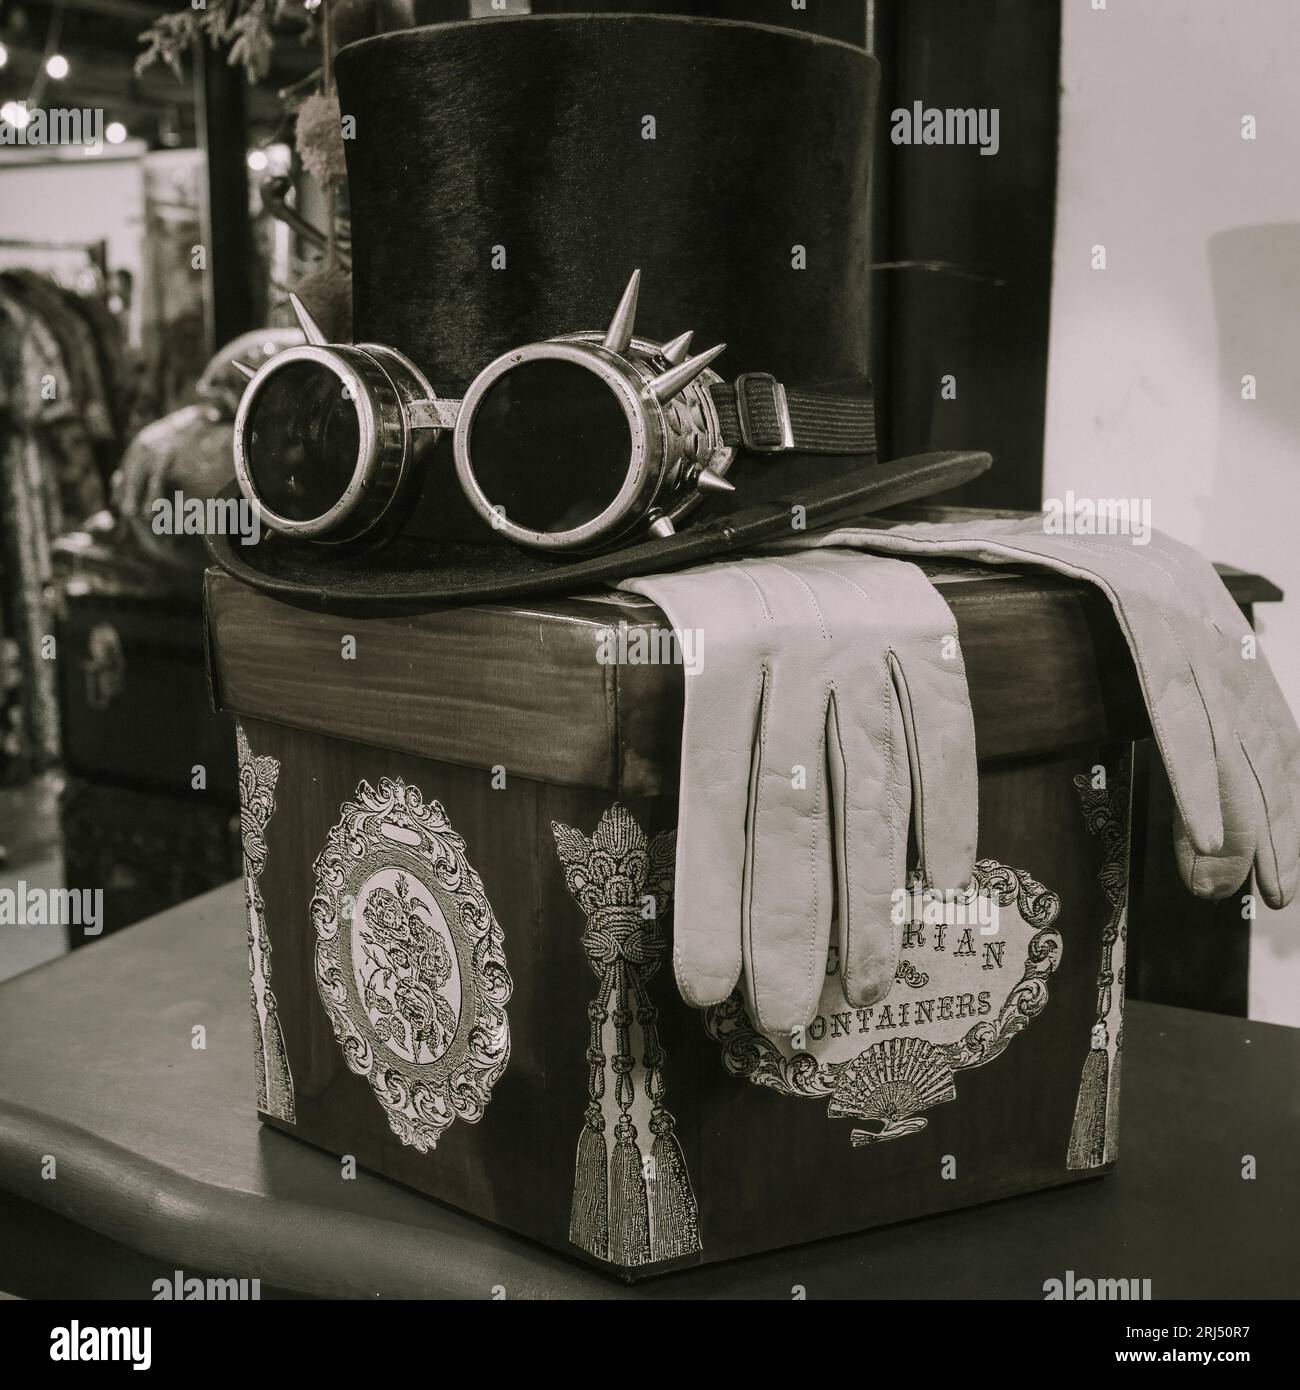 Black top hat with steampunk style sunglasses atop of a pair of leather gloves perched on a decorative box. Stock Photo